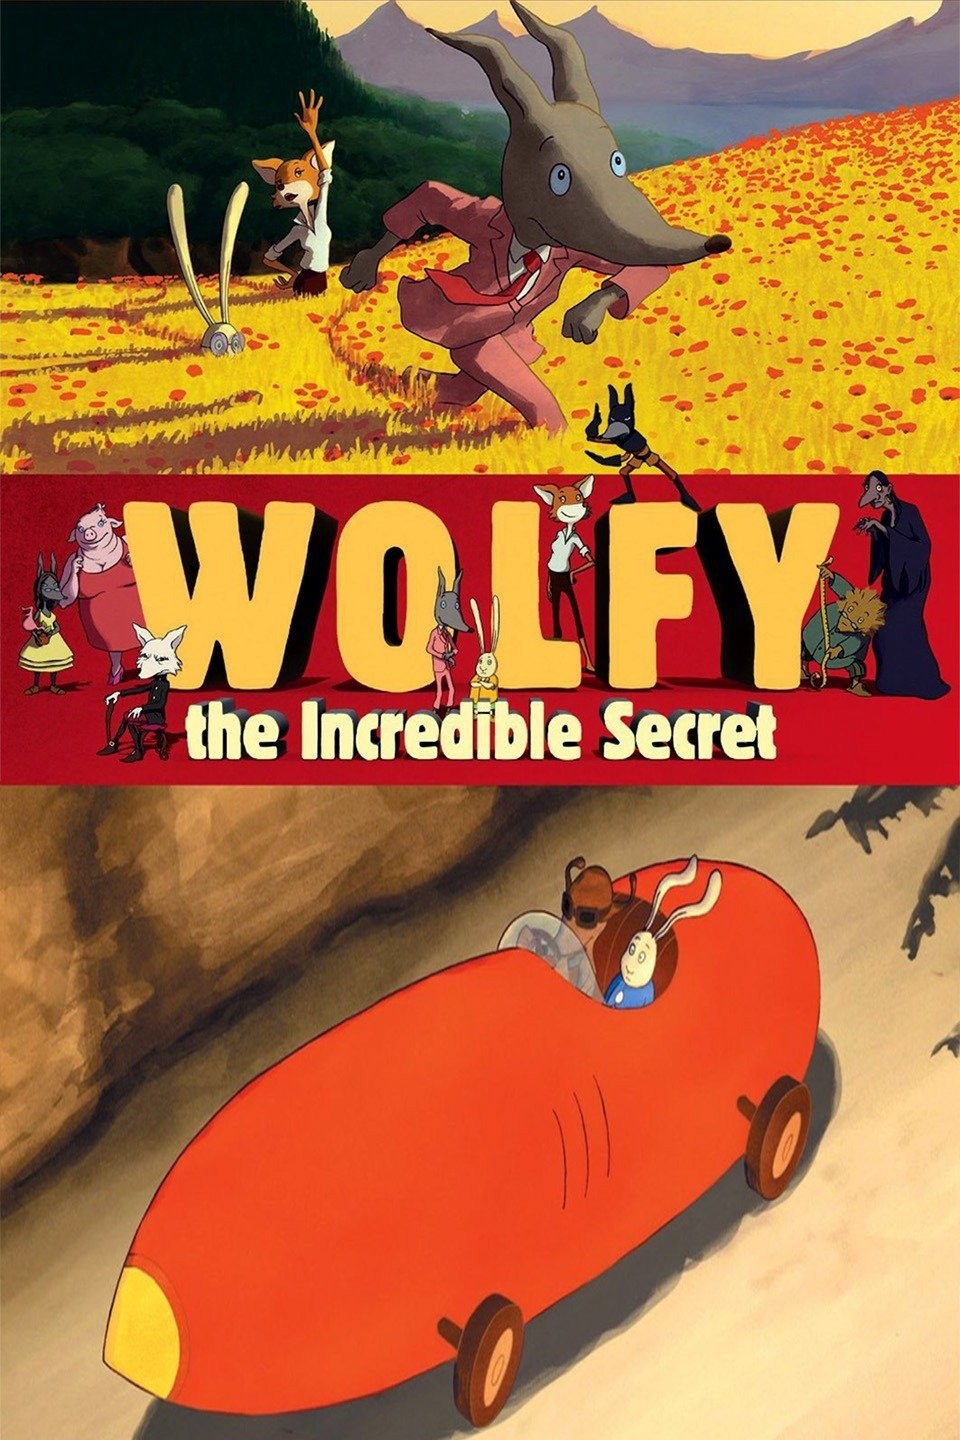 Wolfy, the Incredible Secret